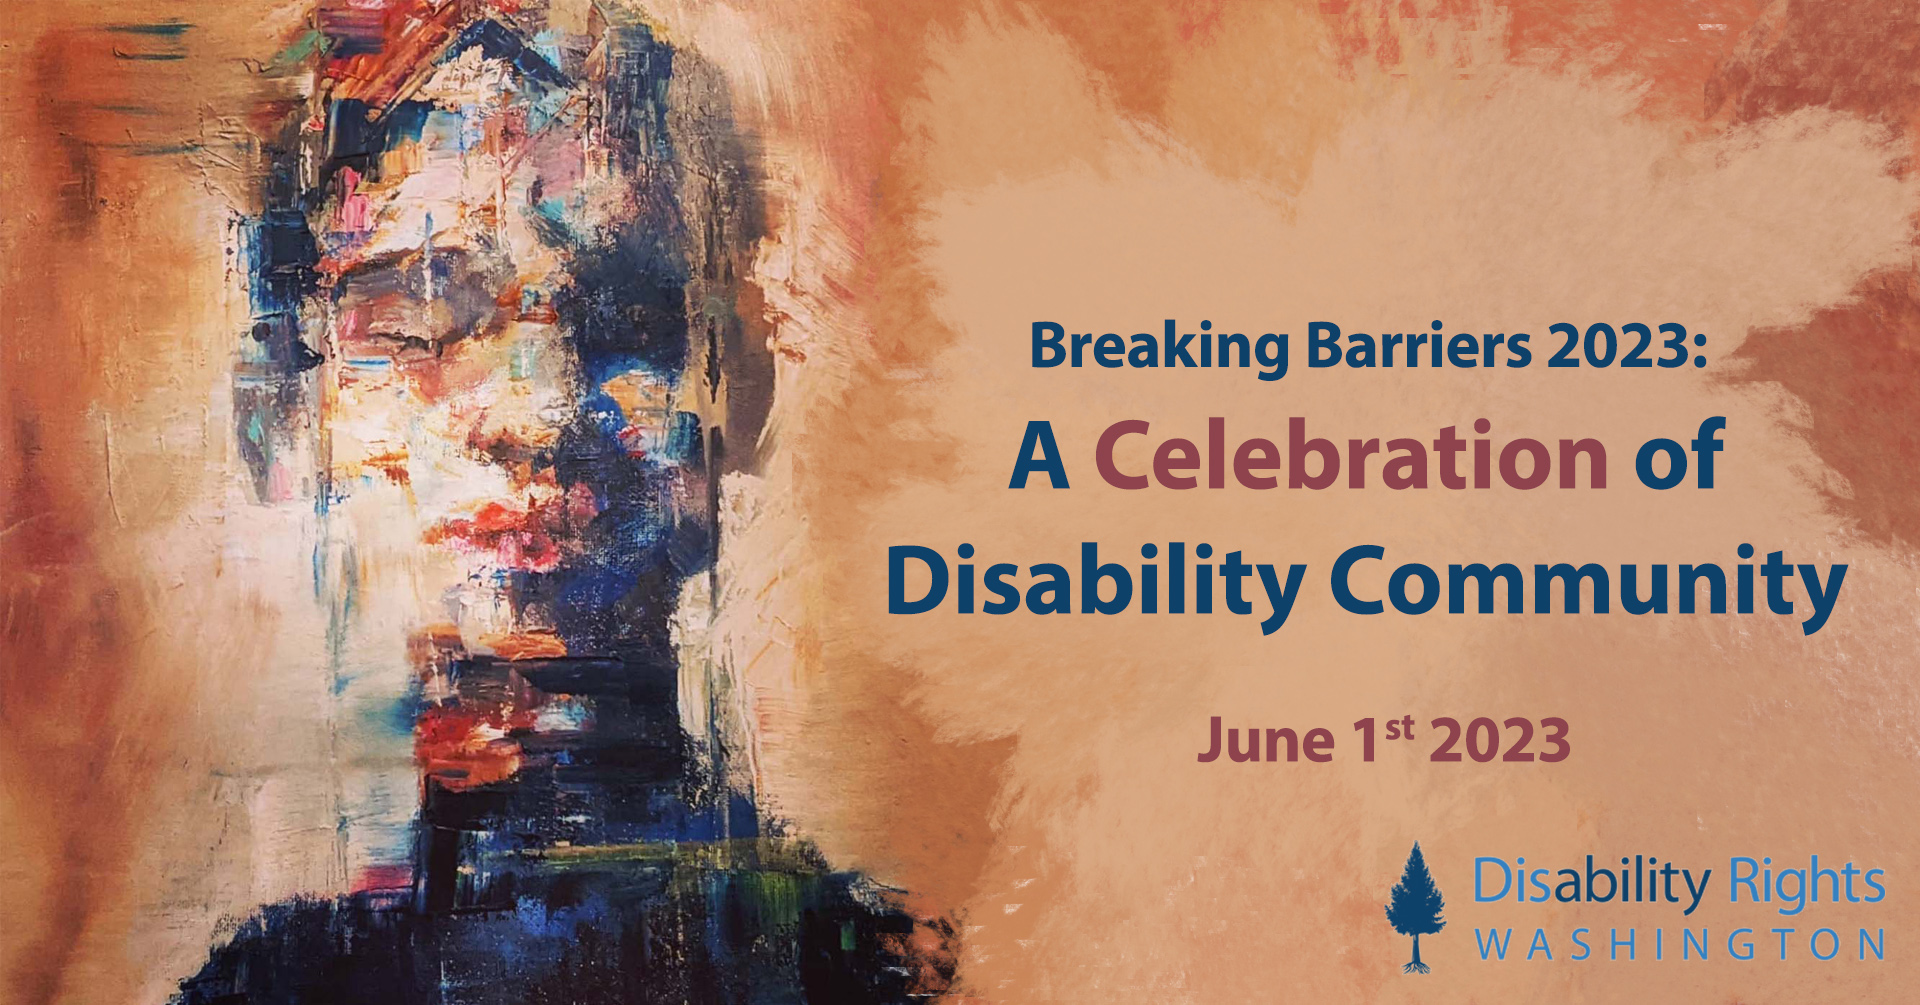 Breaking Barriers Event Poster: an abstract painting of a figure's head with eyes closed, using large brush strokes, and sepia and blue tones